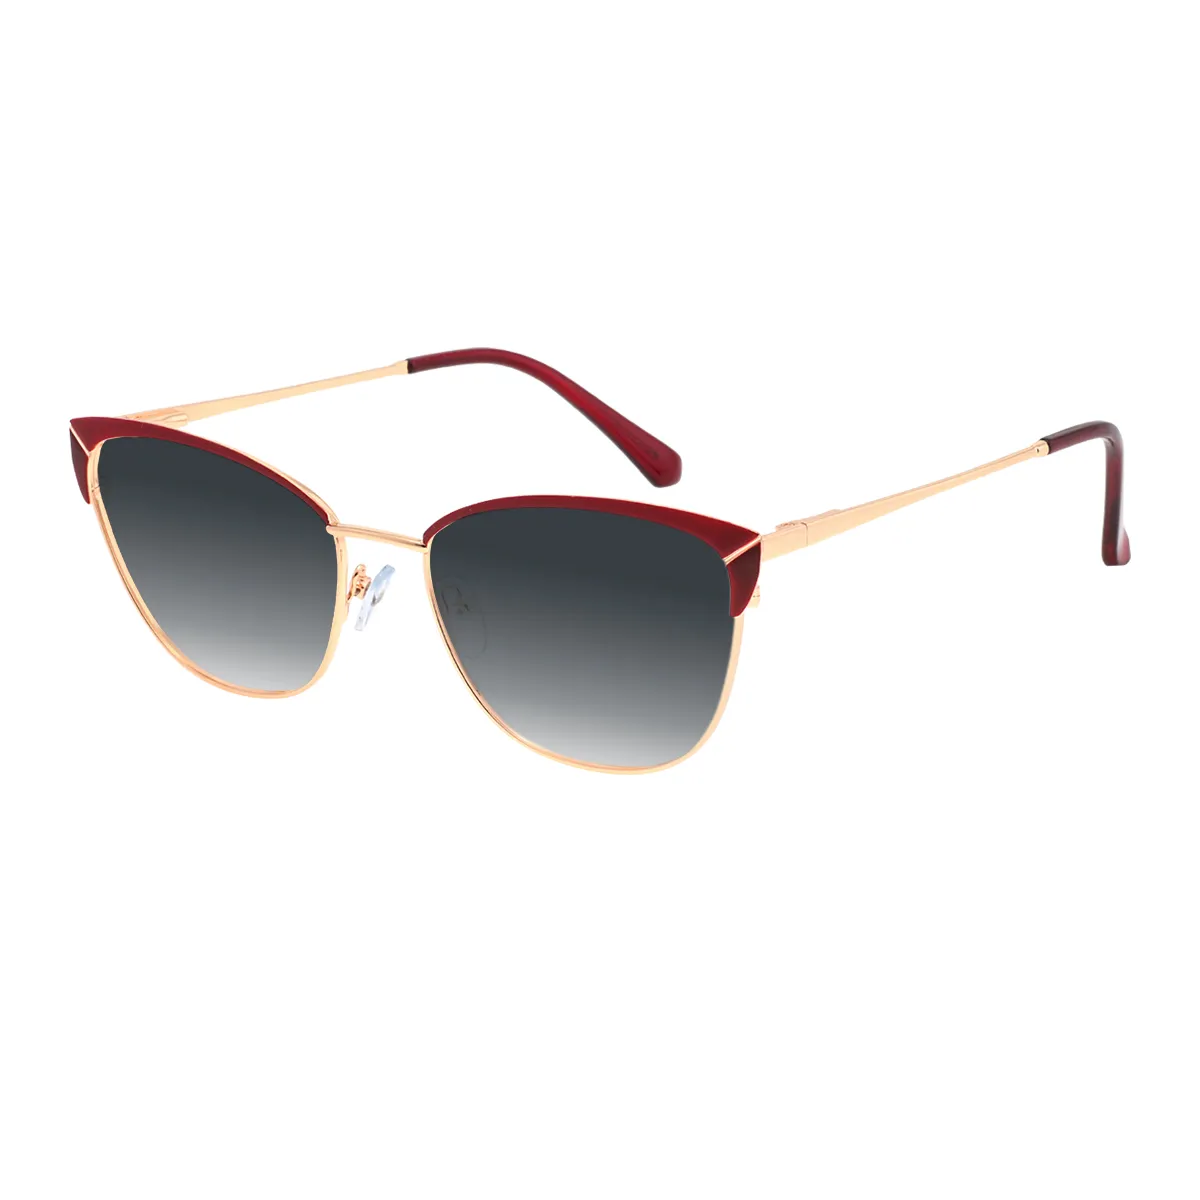 Anstey - Browline Red Sunglasses for Women